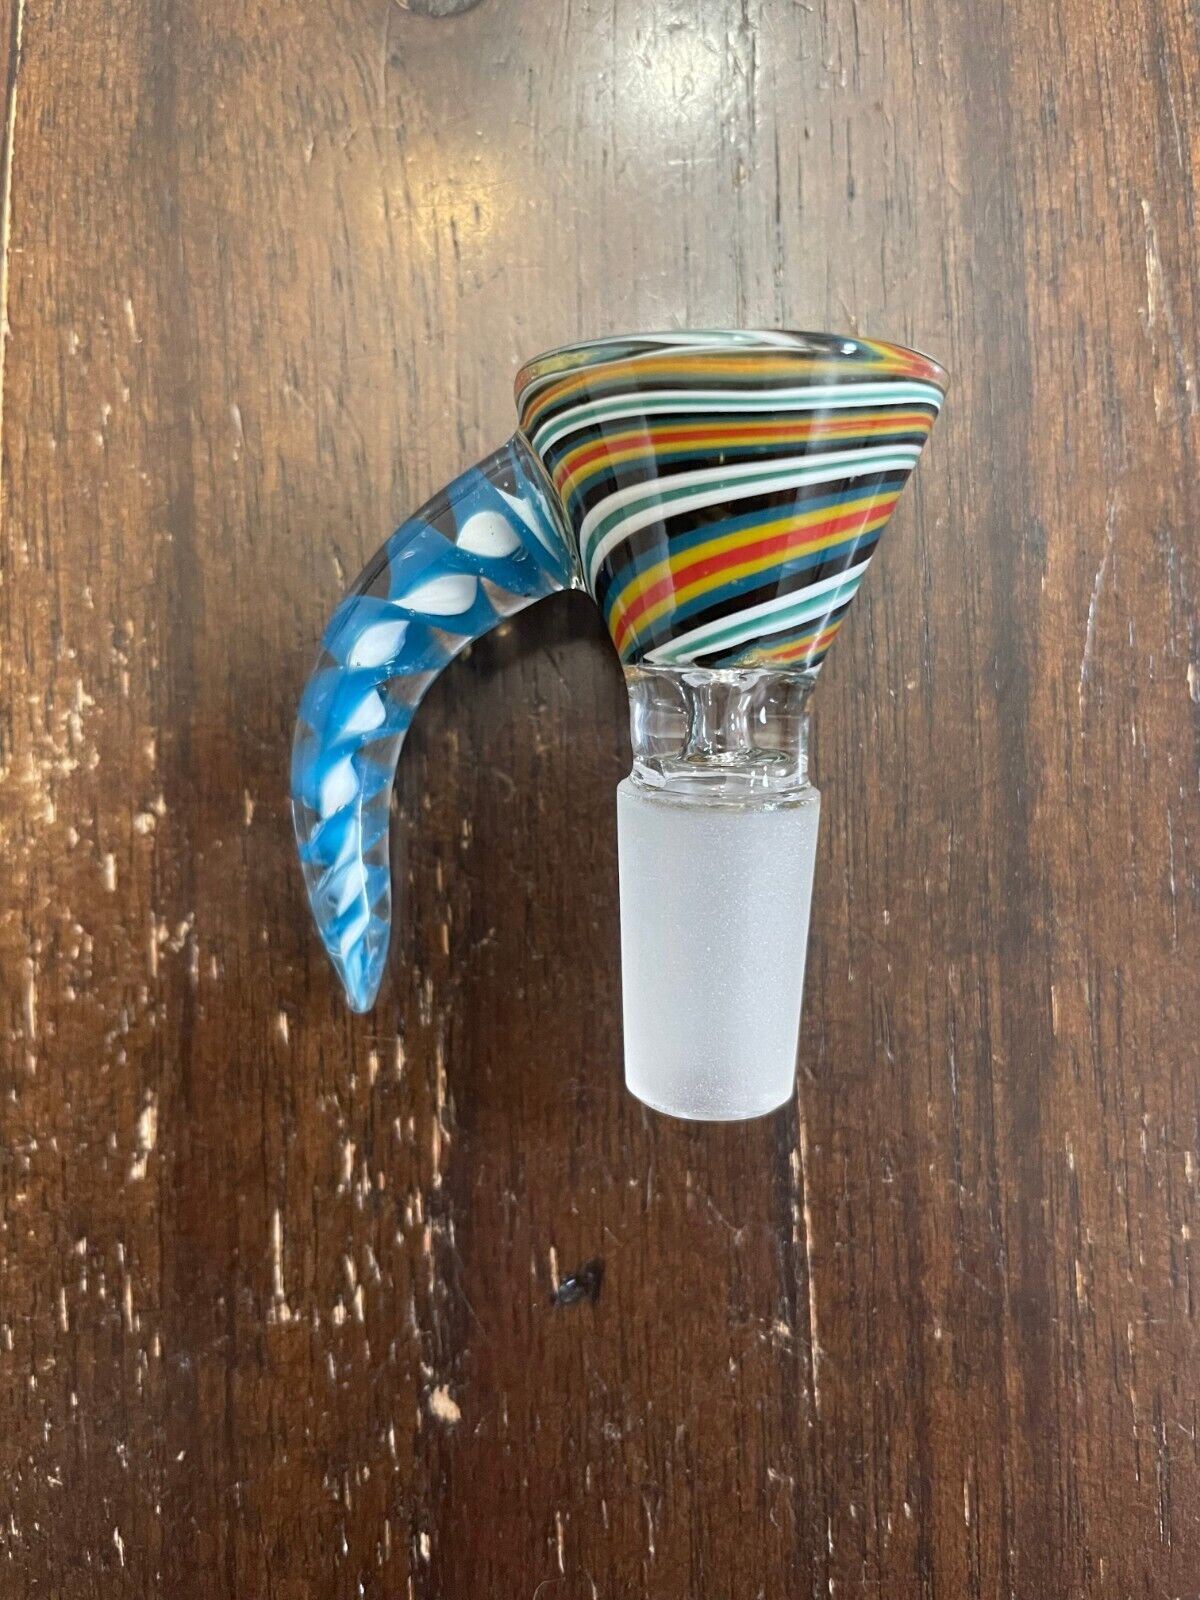 14mm Premium Glass Water Pipe Bowl Big Horn Color Twist